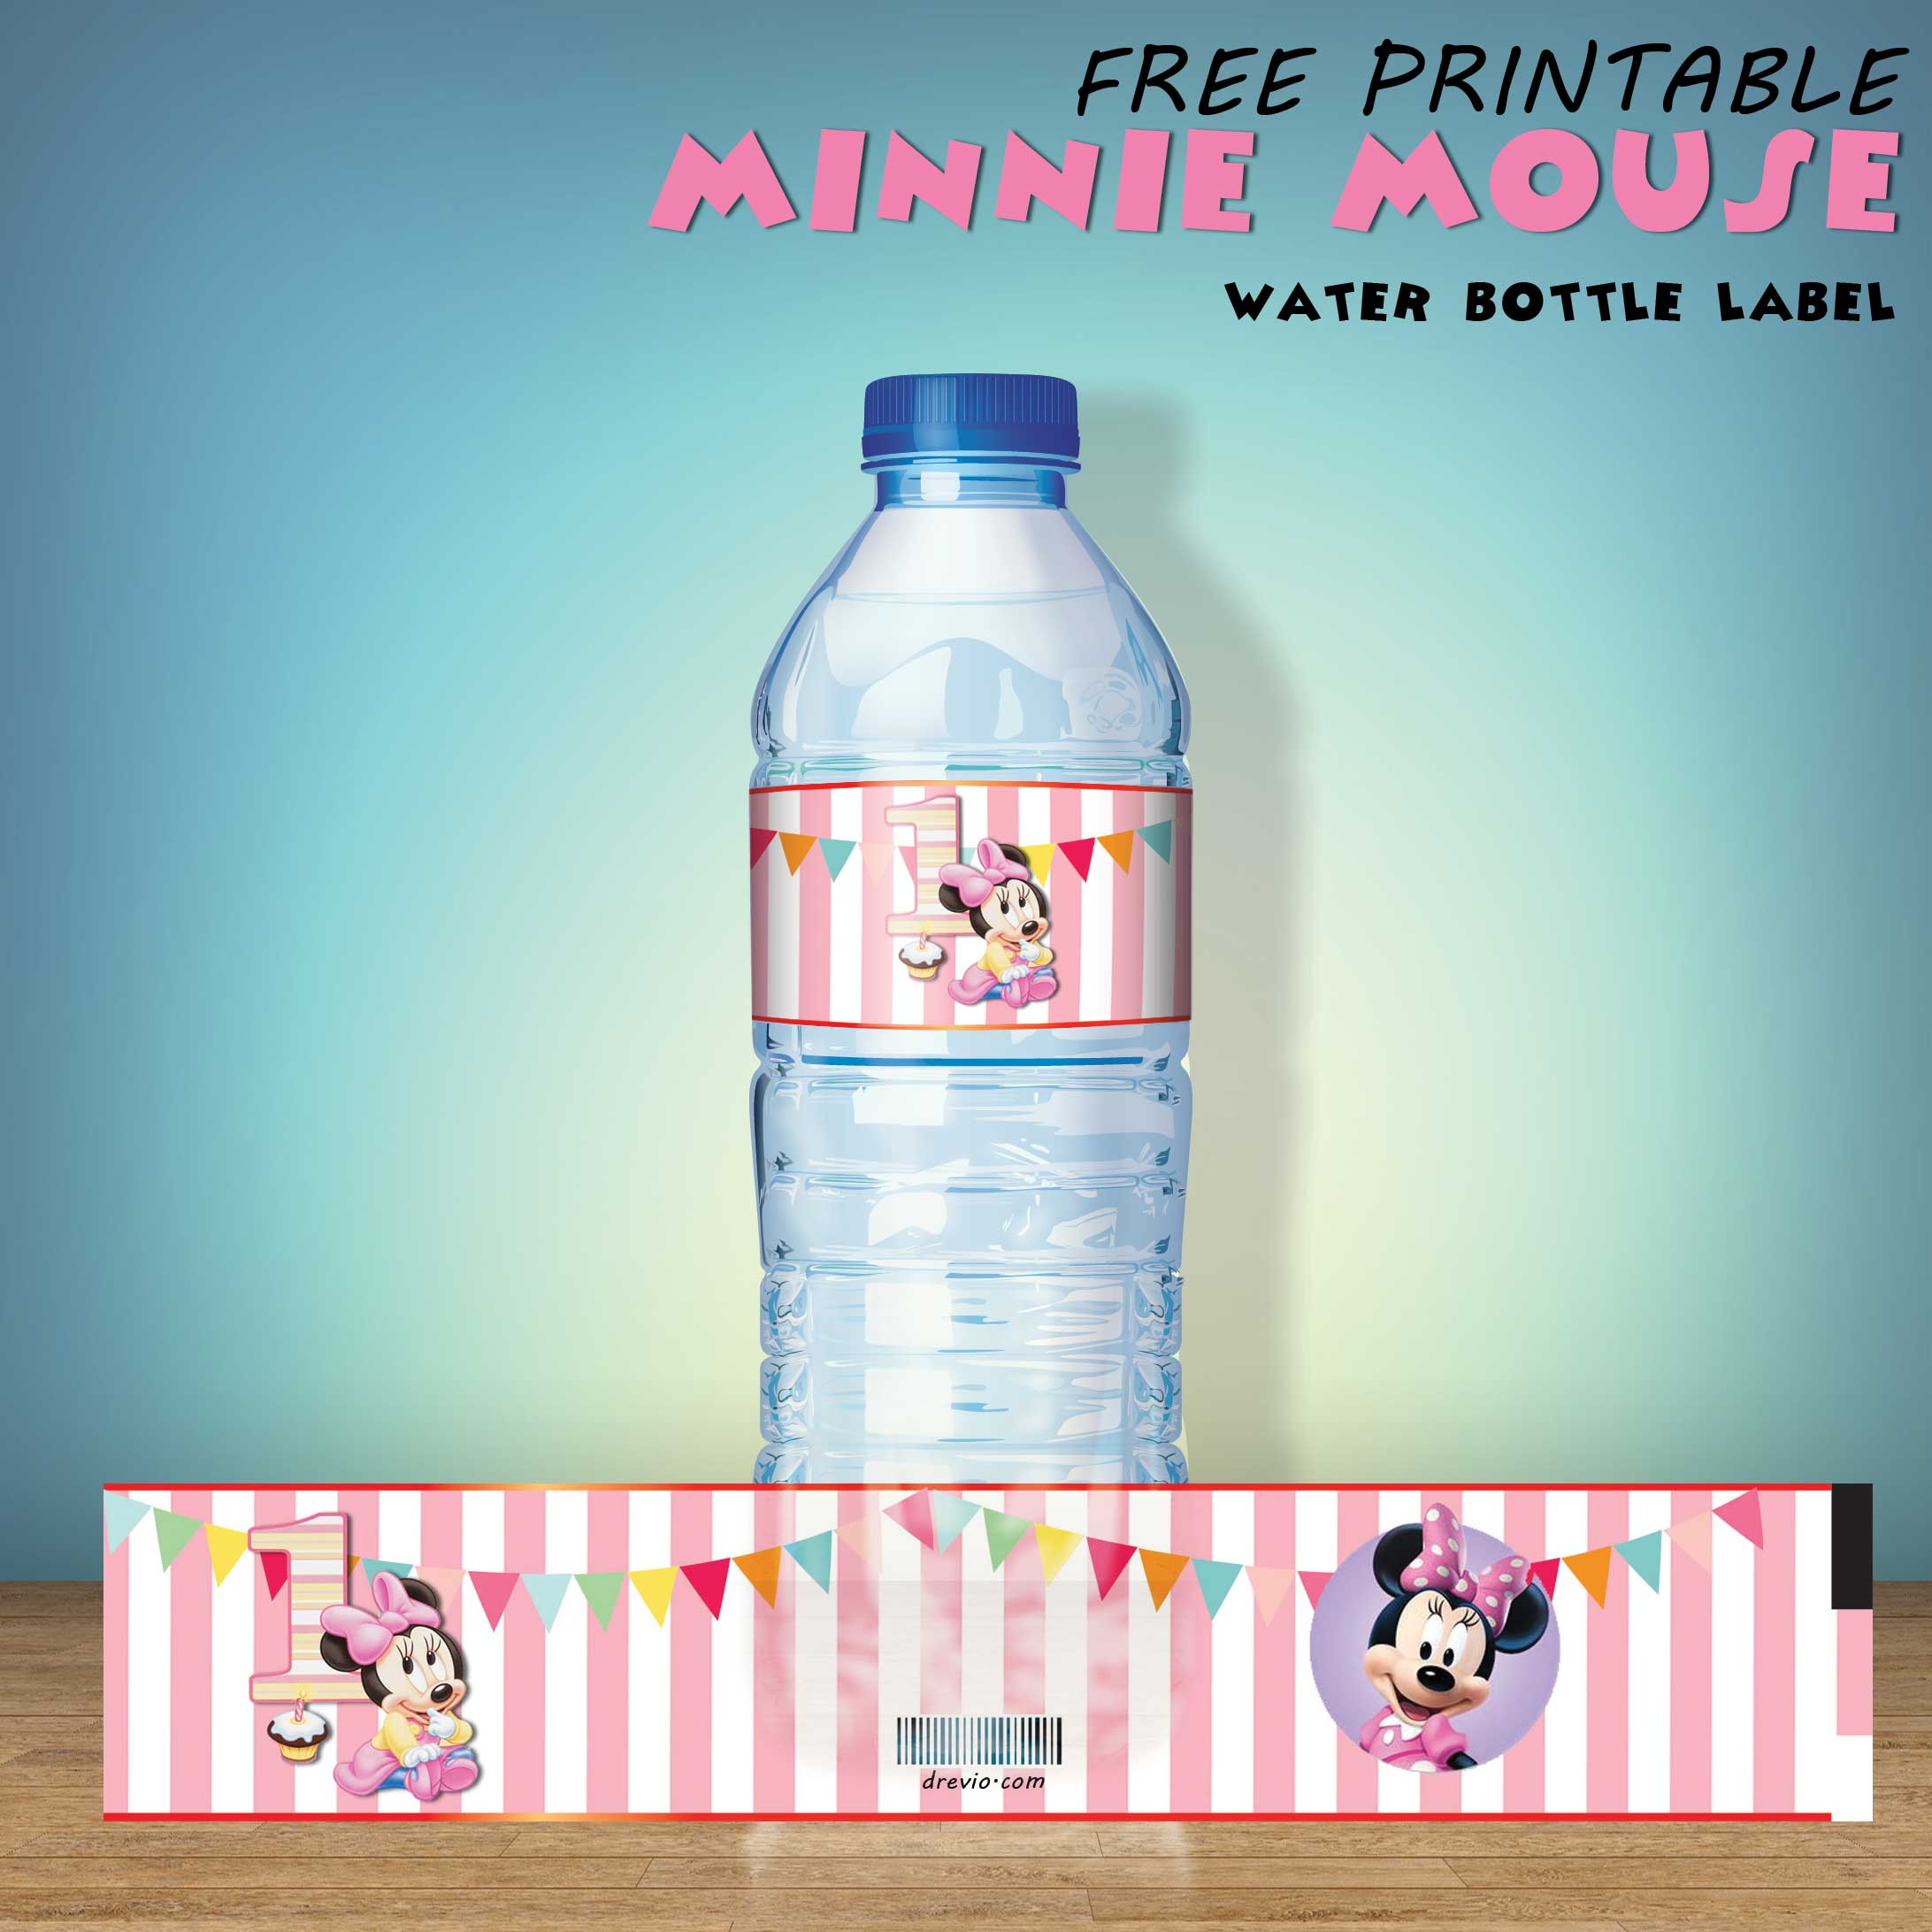 FREE-Minnie-Mouse-Water-Bottle-Label-Preview